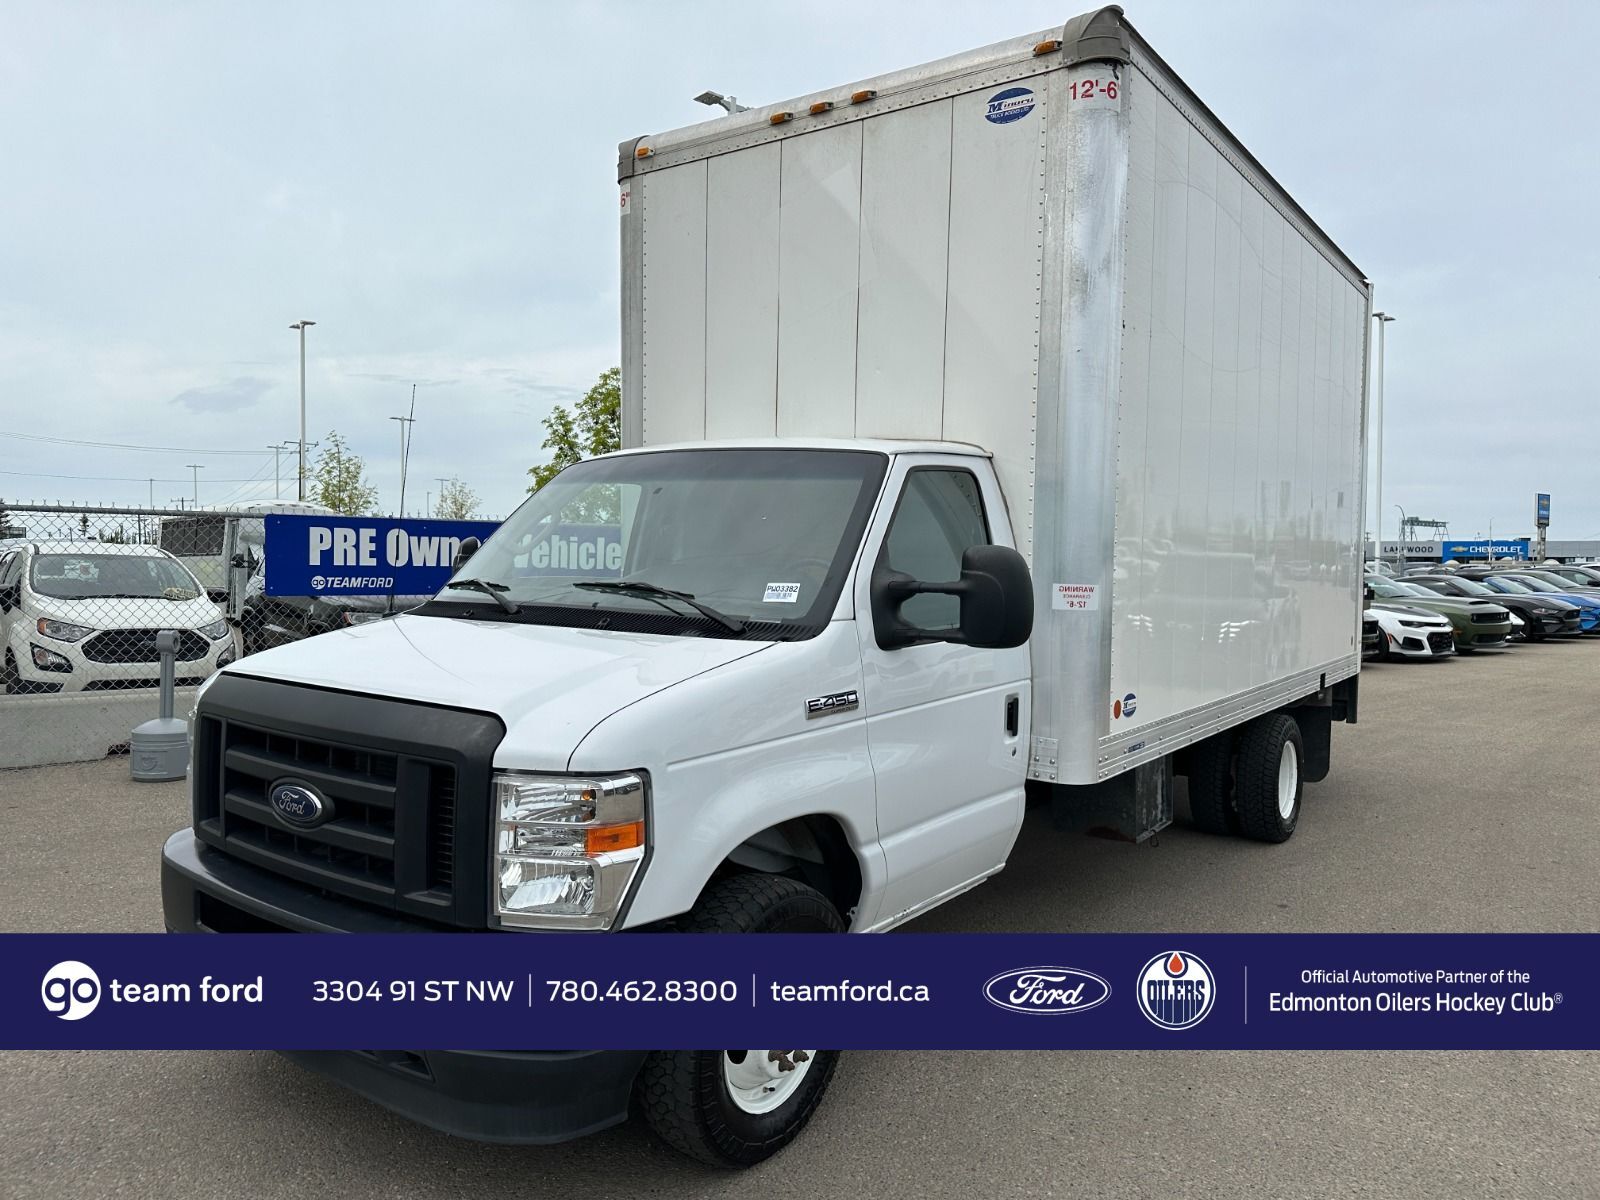 2021 Ford E-Series Cutaway 7.3L V8 ECONOMY-RATED ENG, HILL START ASSIST, TRAI